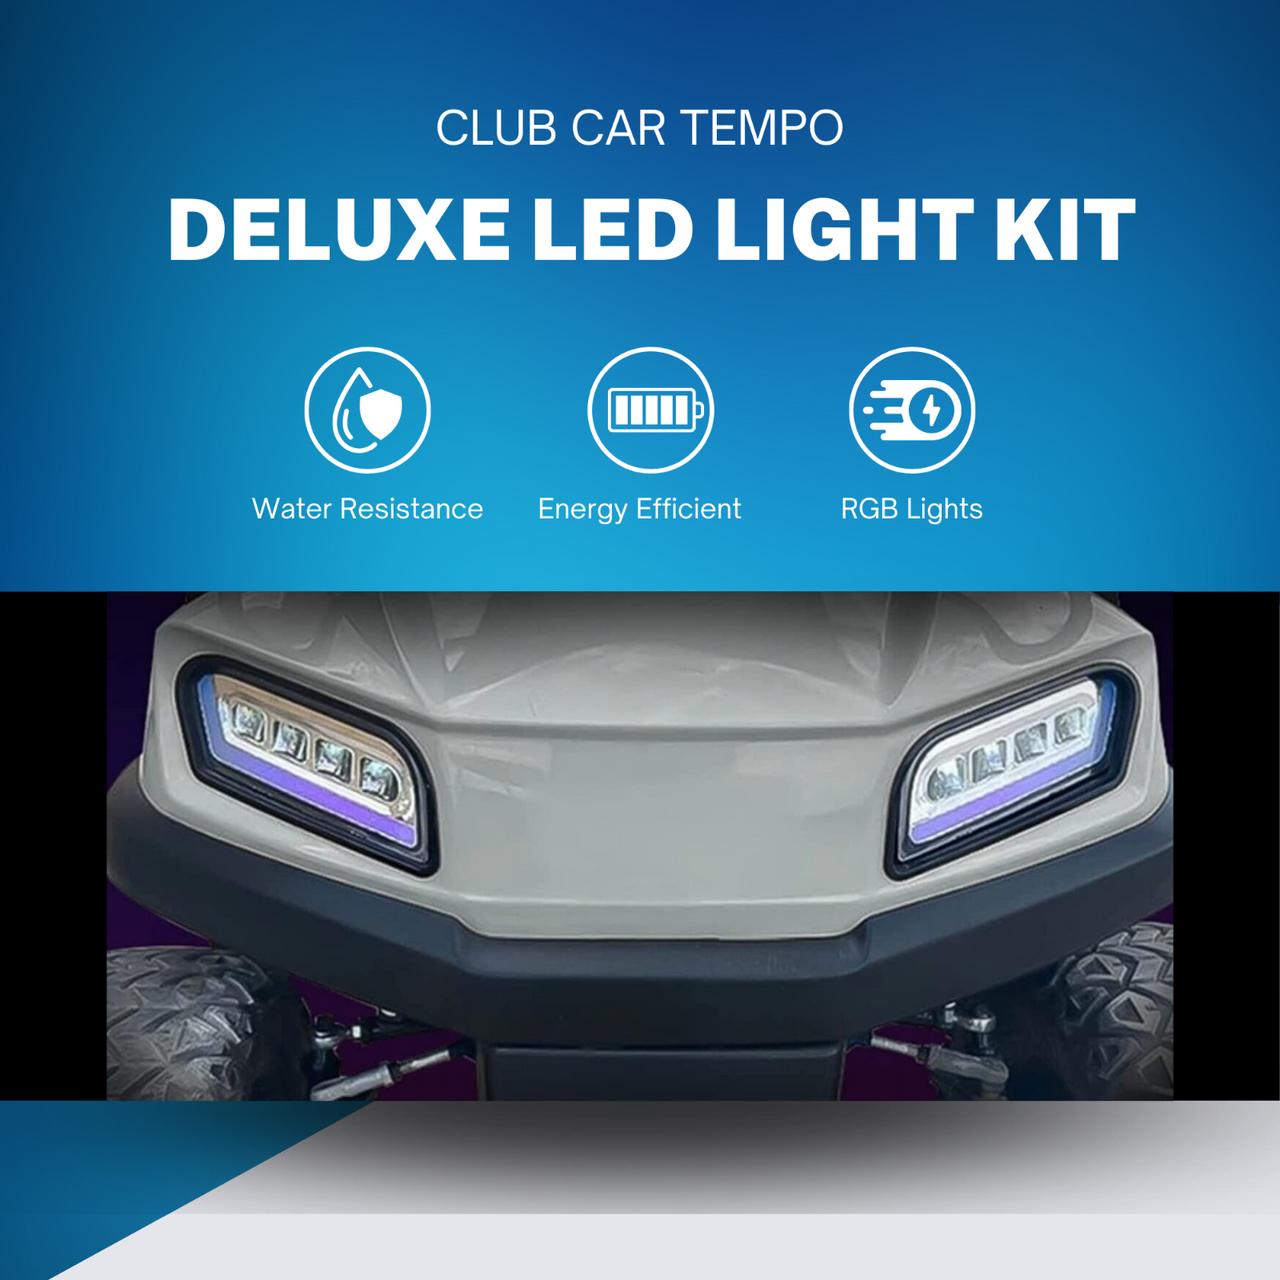 Deluxe LED Light Kit for Club Car Tempo Carts with RGB Daytime Running Light for and Stylish - REVENGE GOLF CART PARTS & ACCESSORIES